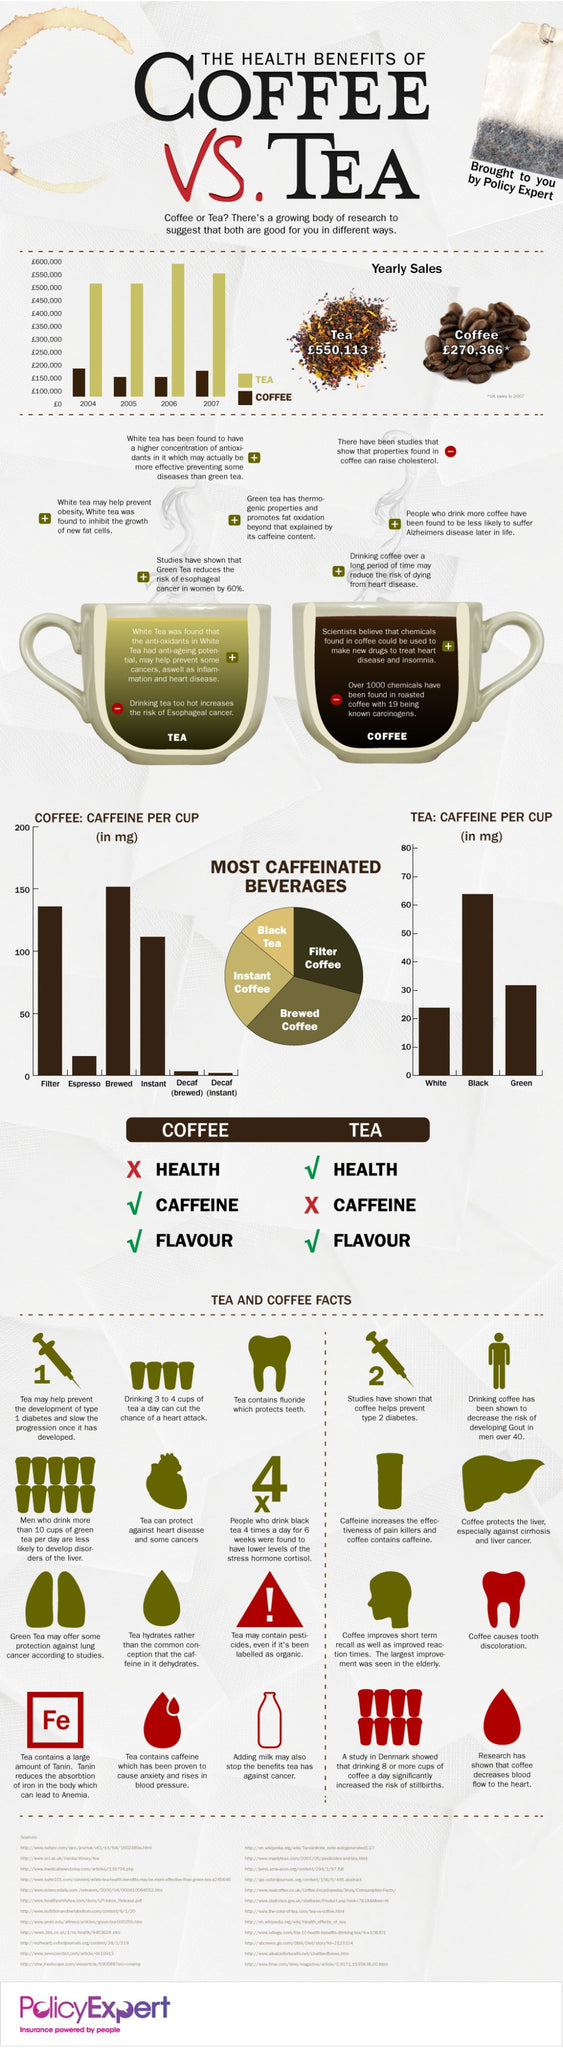 health benefits and caffeine content of coffee and tea